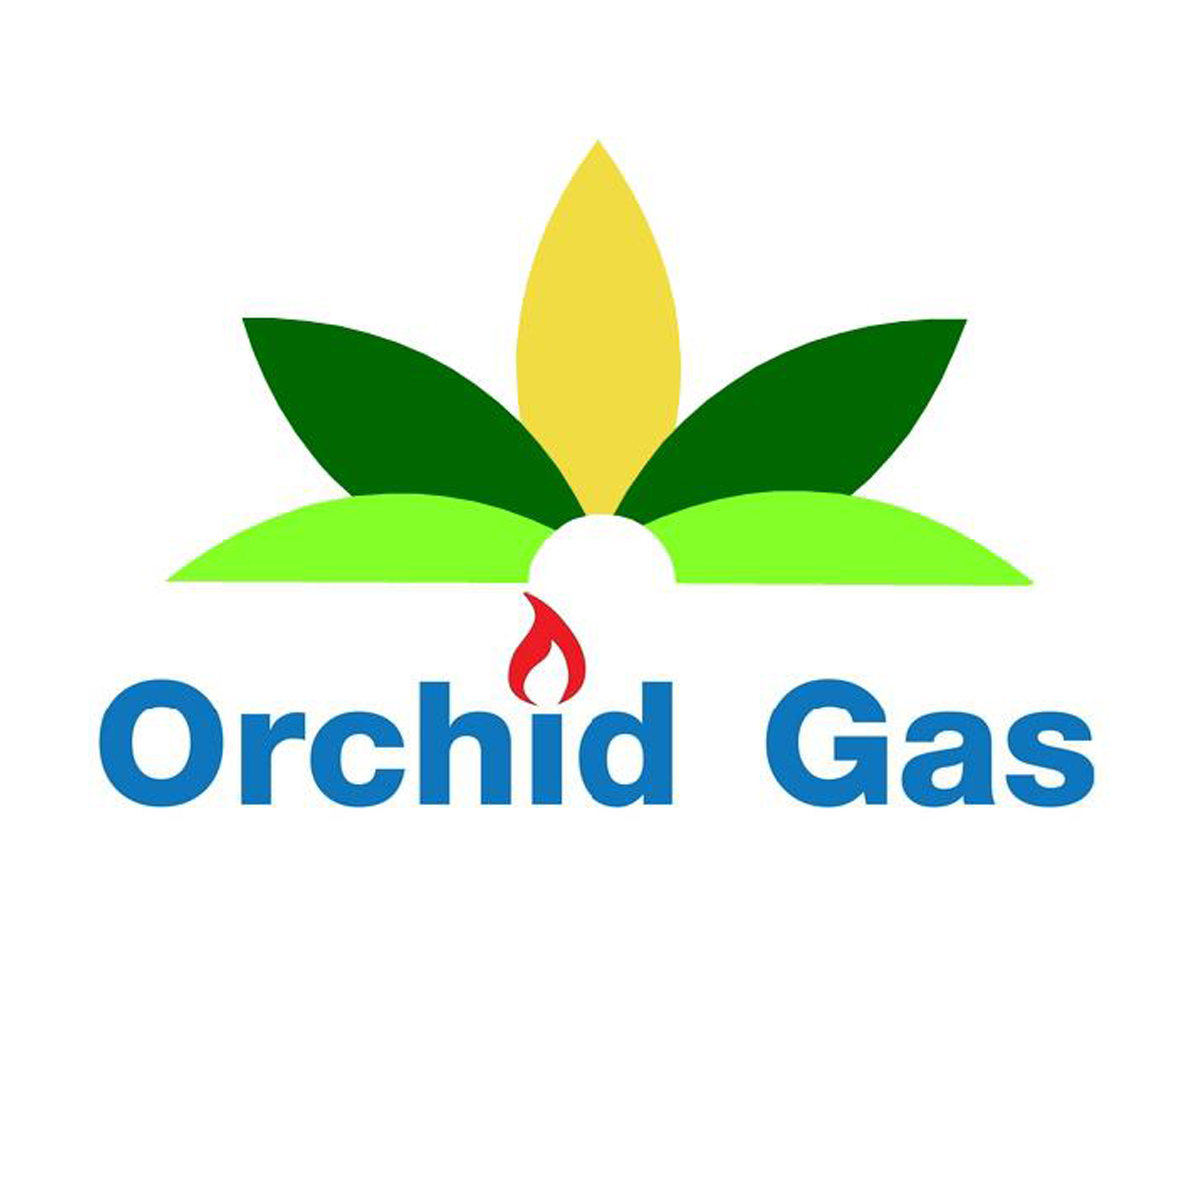 Orchid Gas